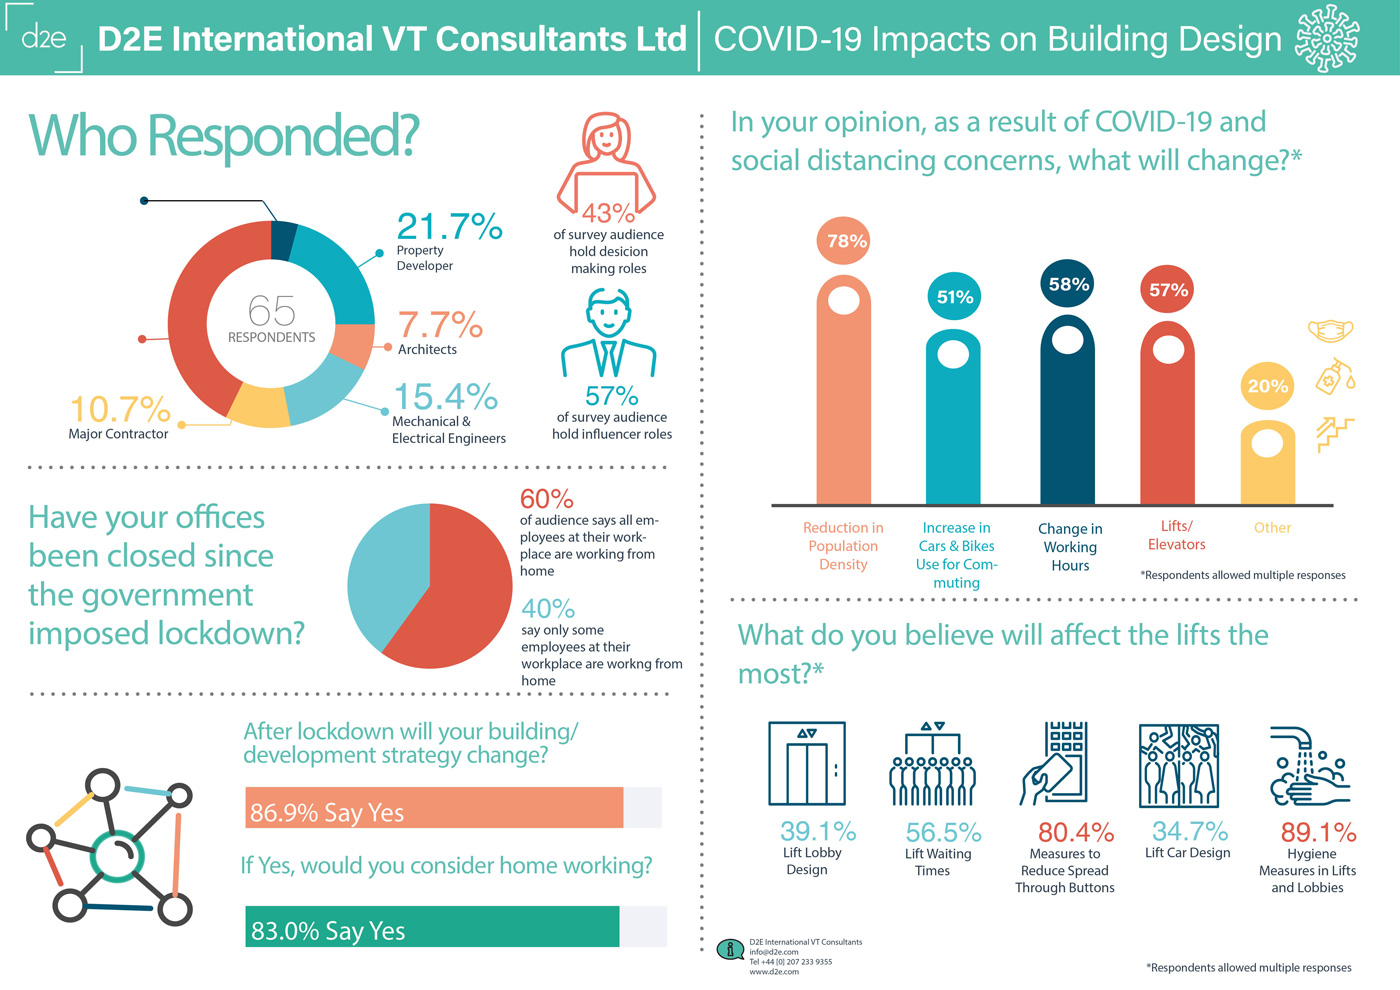 COVID-19 impacts on Building Design, who responded